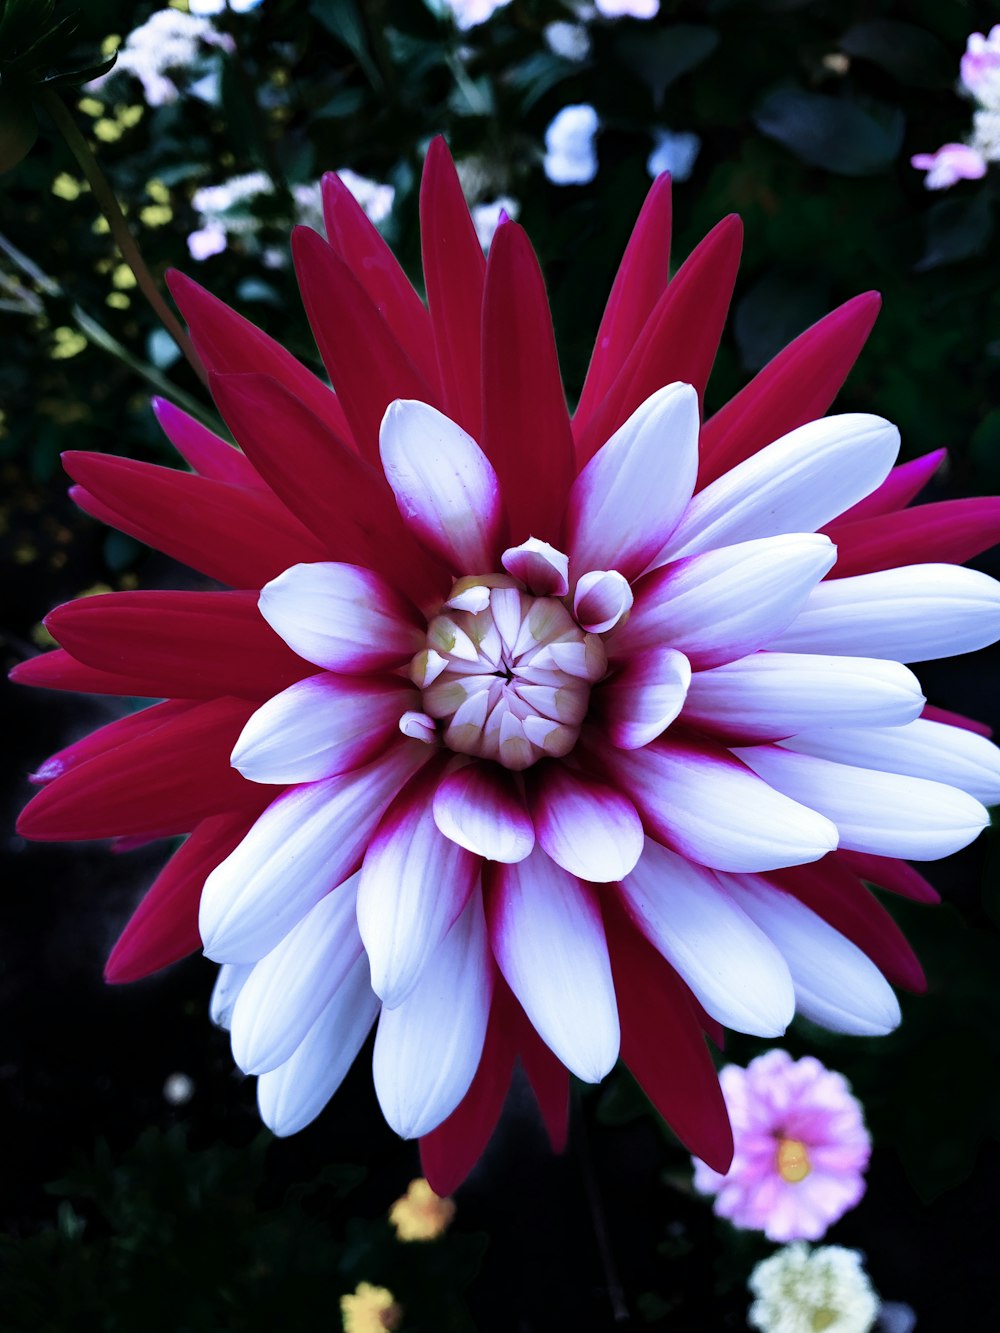 red and white-petaled flower